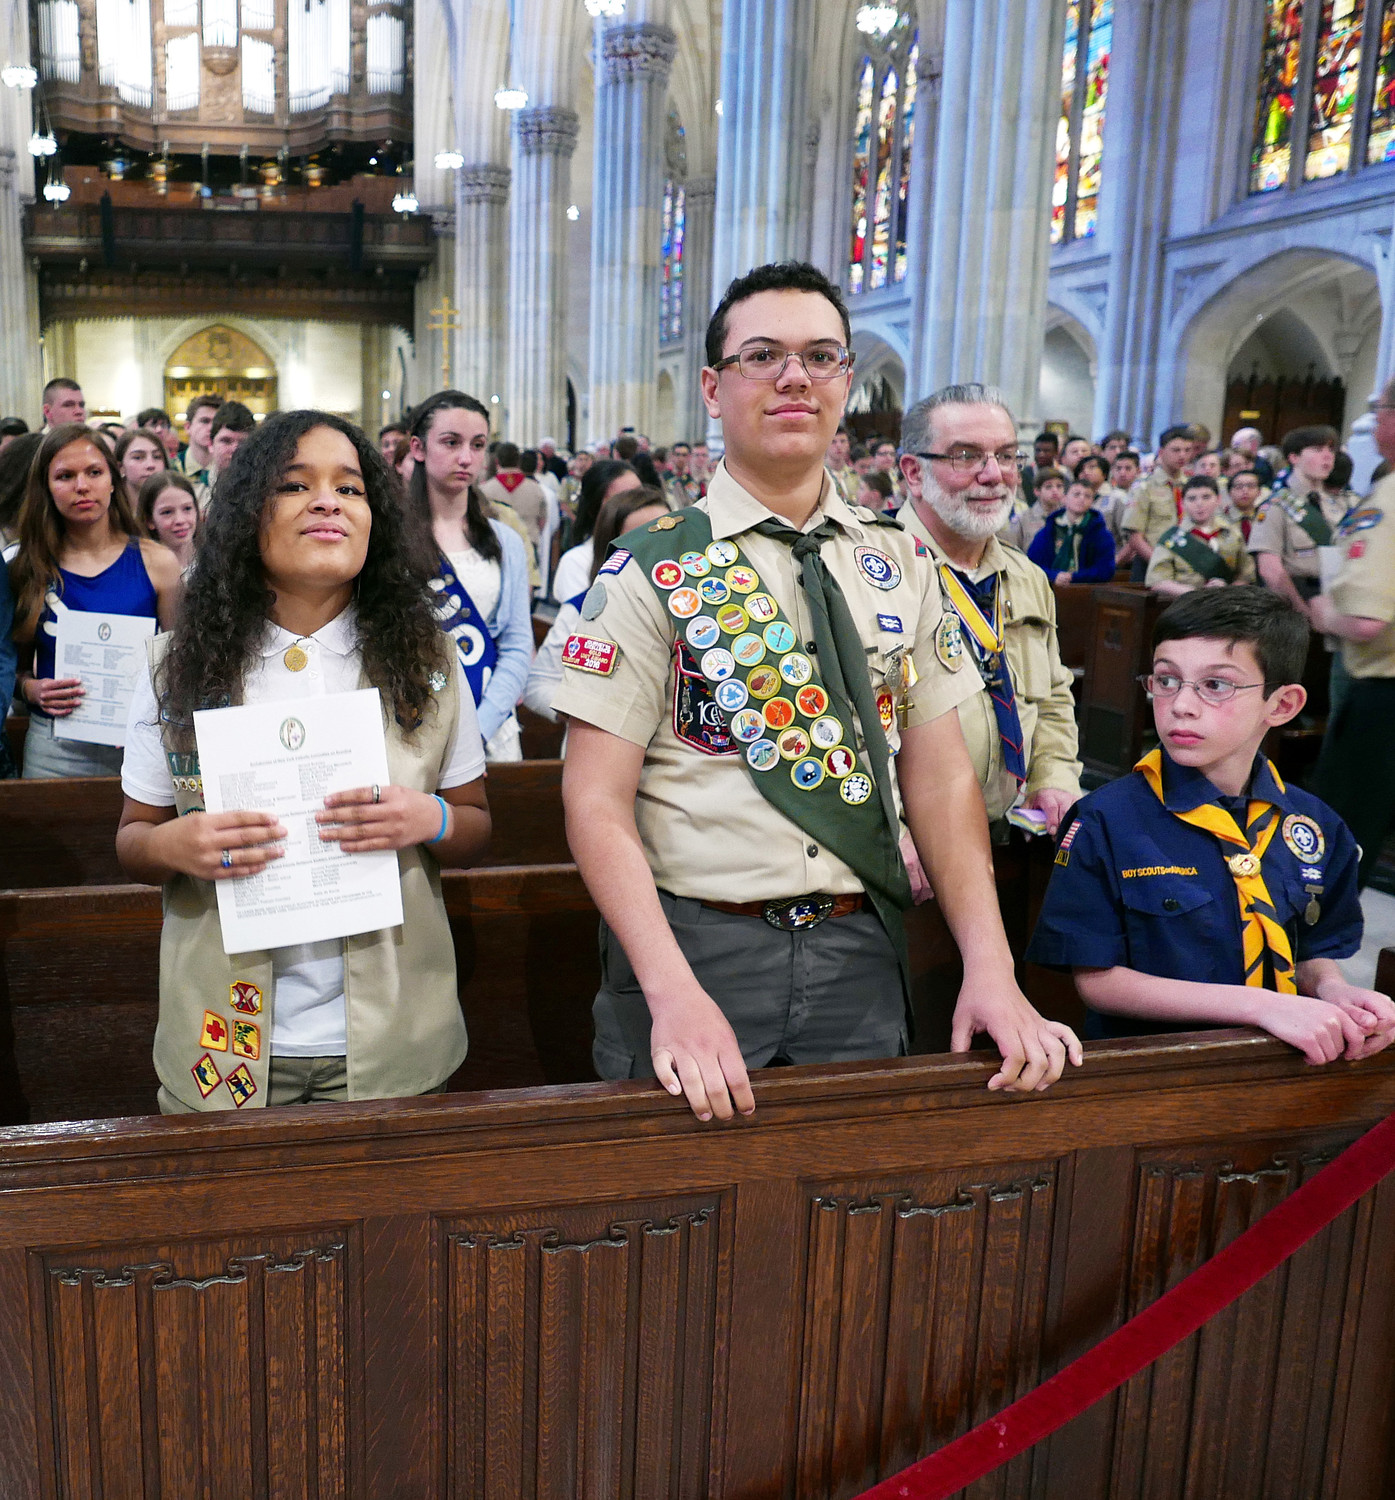 Scouts fill the pews of St. Patrick’s Cathedral for the archdiocesan Emblem Sunday Scouting Mass celebrated by Cardinal Dolan April 22. Honors were given to 158 scouts at the afternoon liturgy, which was attended by 900 people.